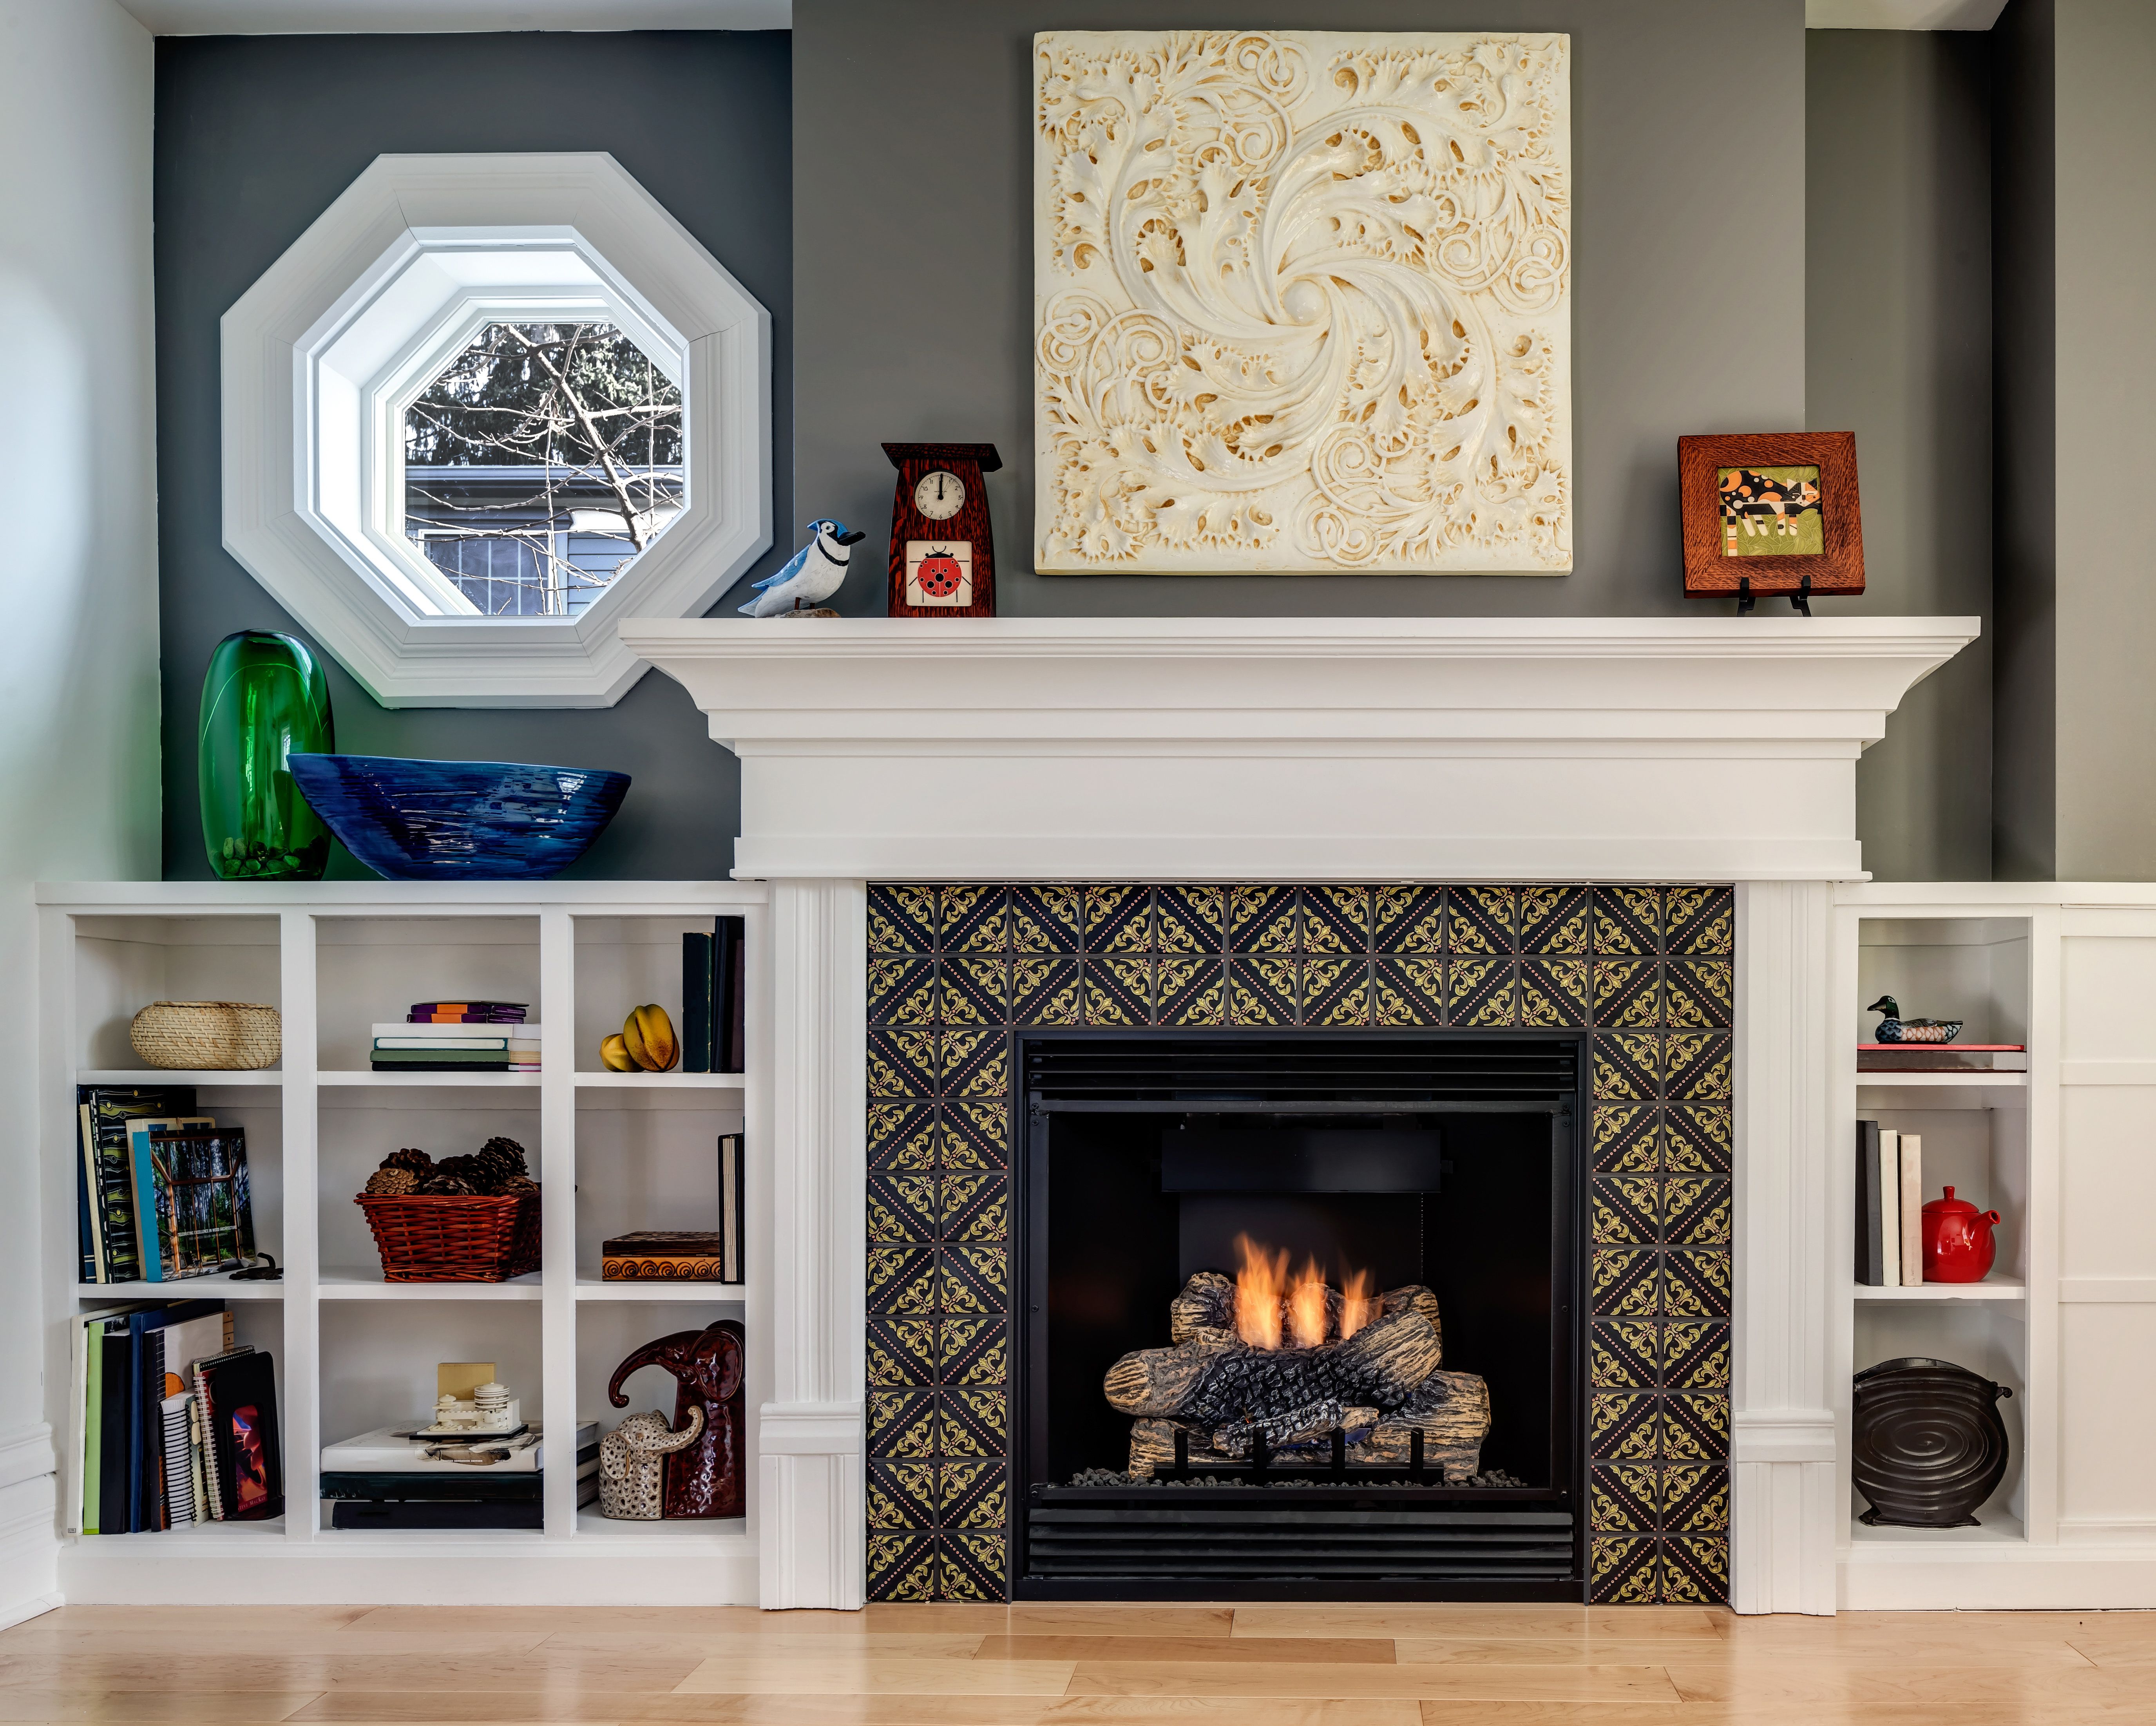 Classic Fireplaces Unique This Small but Stylish Fireplace Features Our Lisbon Tile